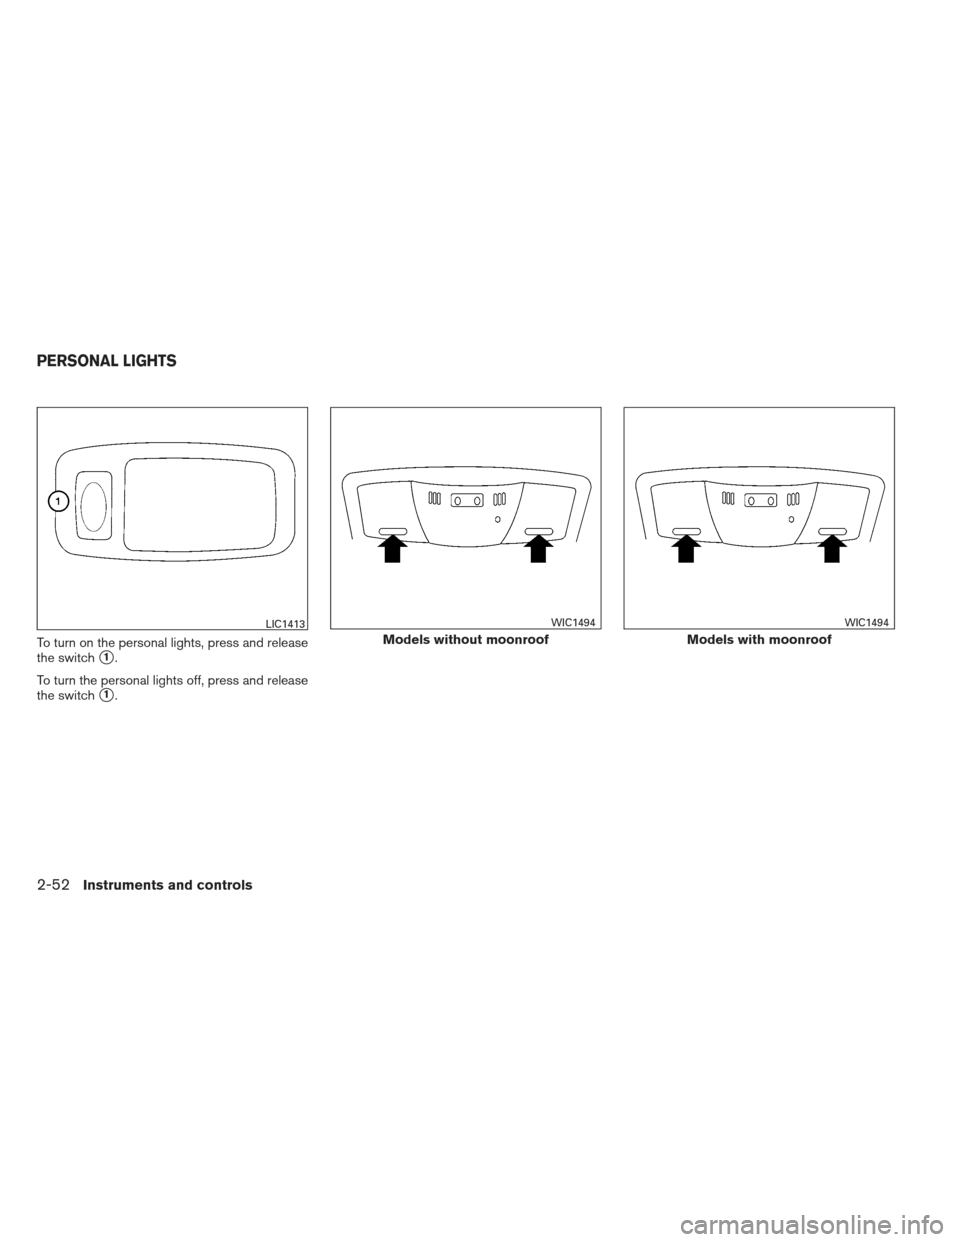 NISSAN MAXIMA 2012 A35 / 7.G Owners Manual To turn on the personal lights, press and release
the switch
1.
To turn the personal lights off, press and release
the switch
1.
LIC1413
Models without moonroof
WIC1494
Models with moonroof
WIC1494
